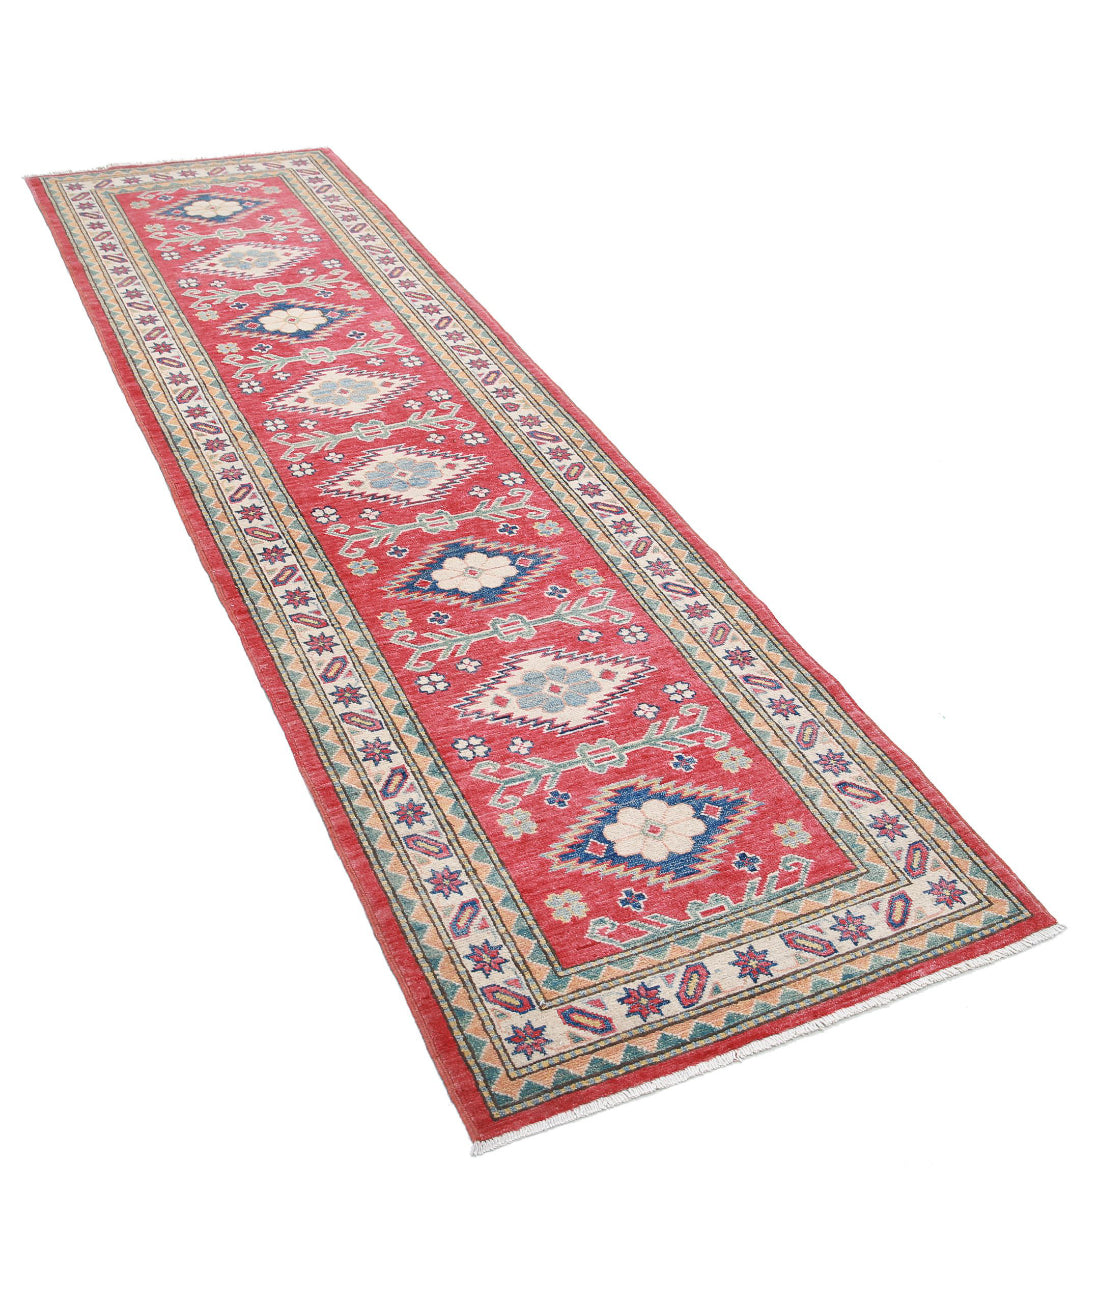 Hand Knotted Tribal Kazak Wool Rug - 2'8'' x 9'6'' 2'8'' x 9'6'' (80 X 285) / Red / Ivory